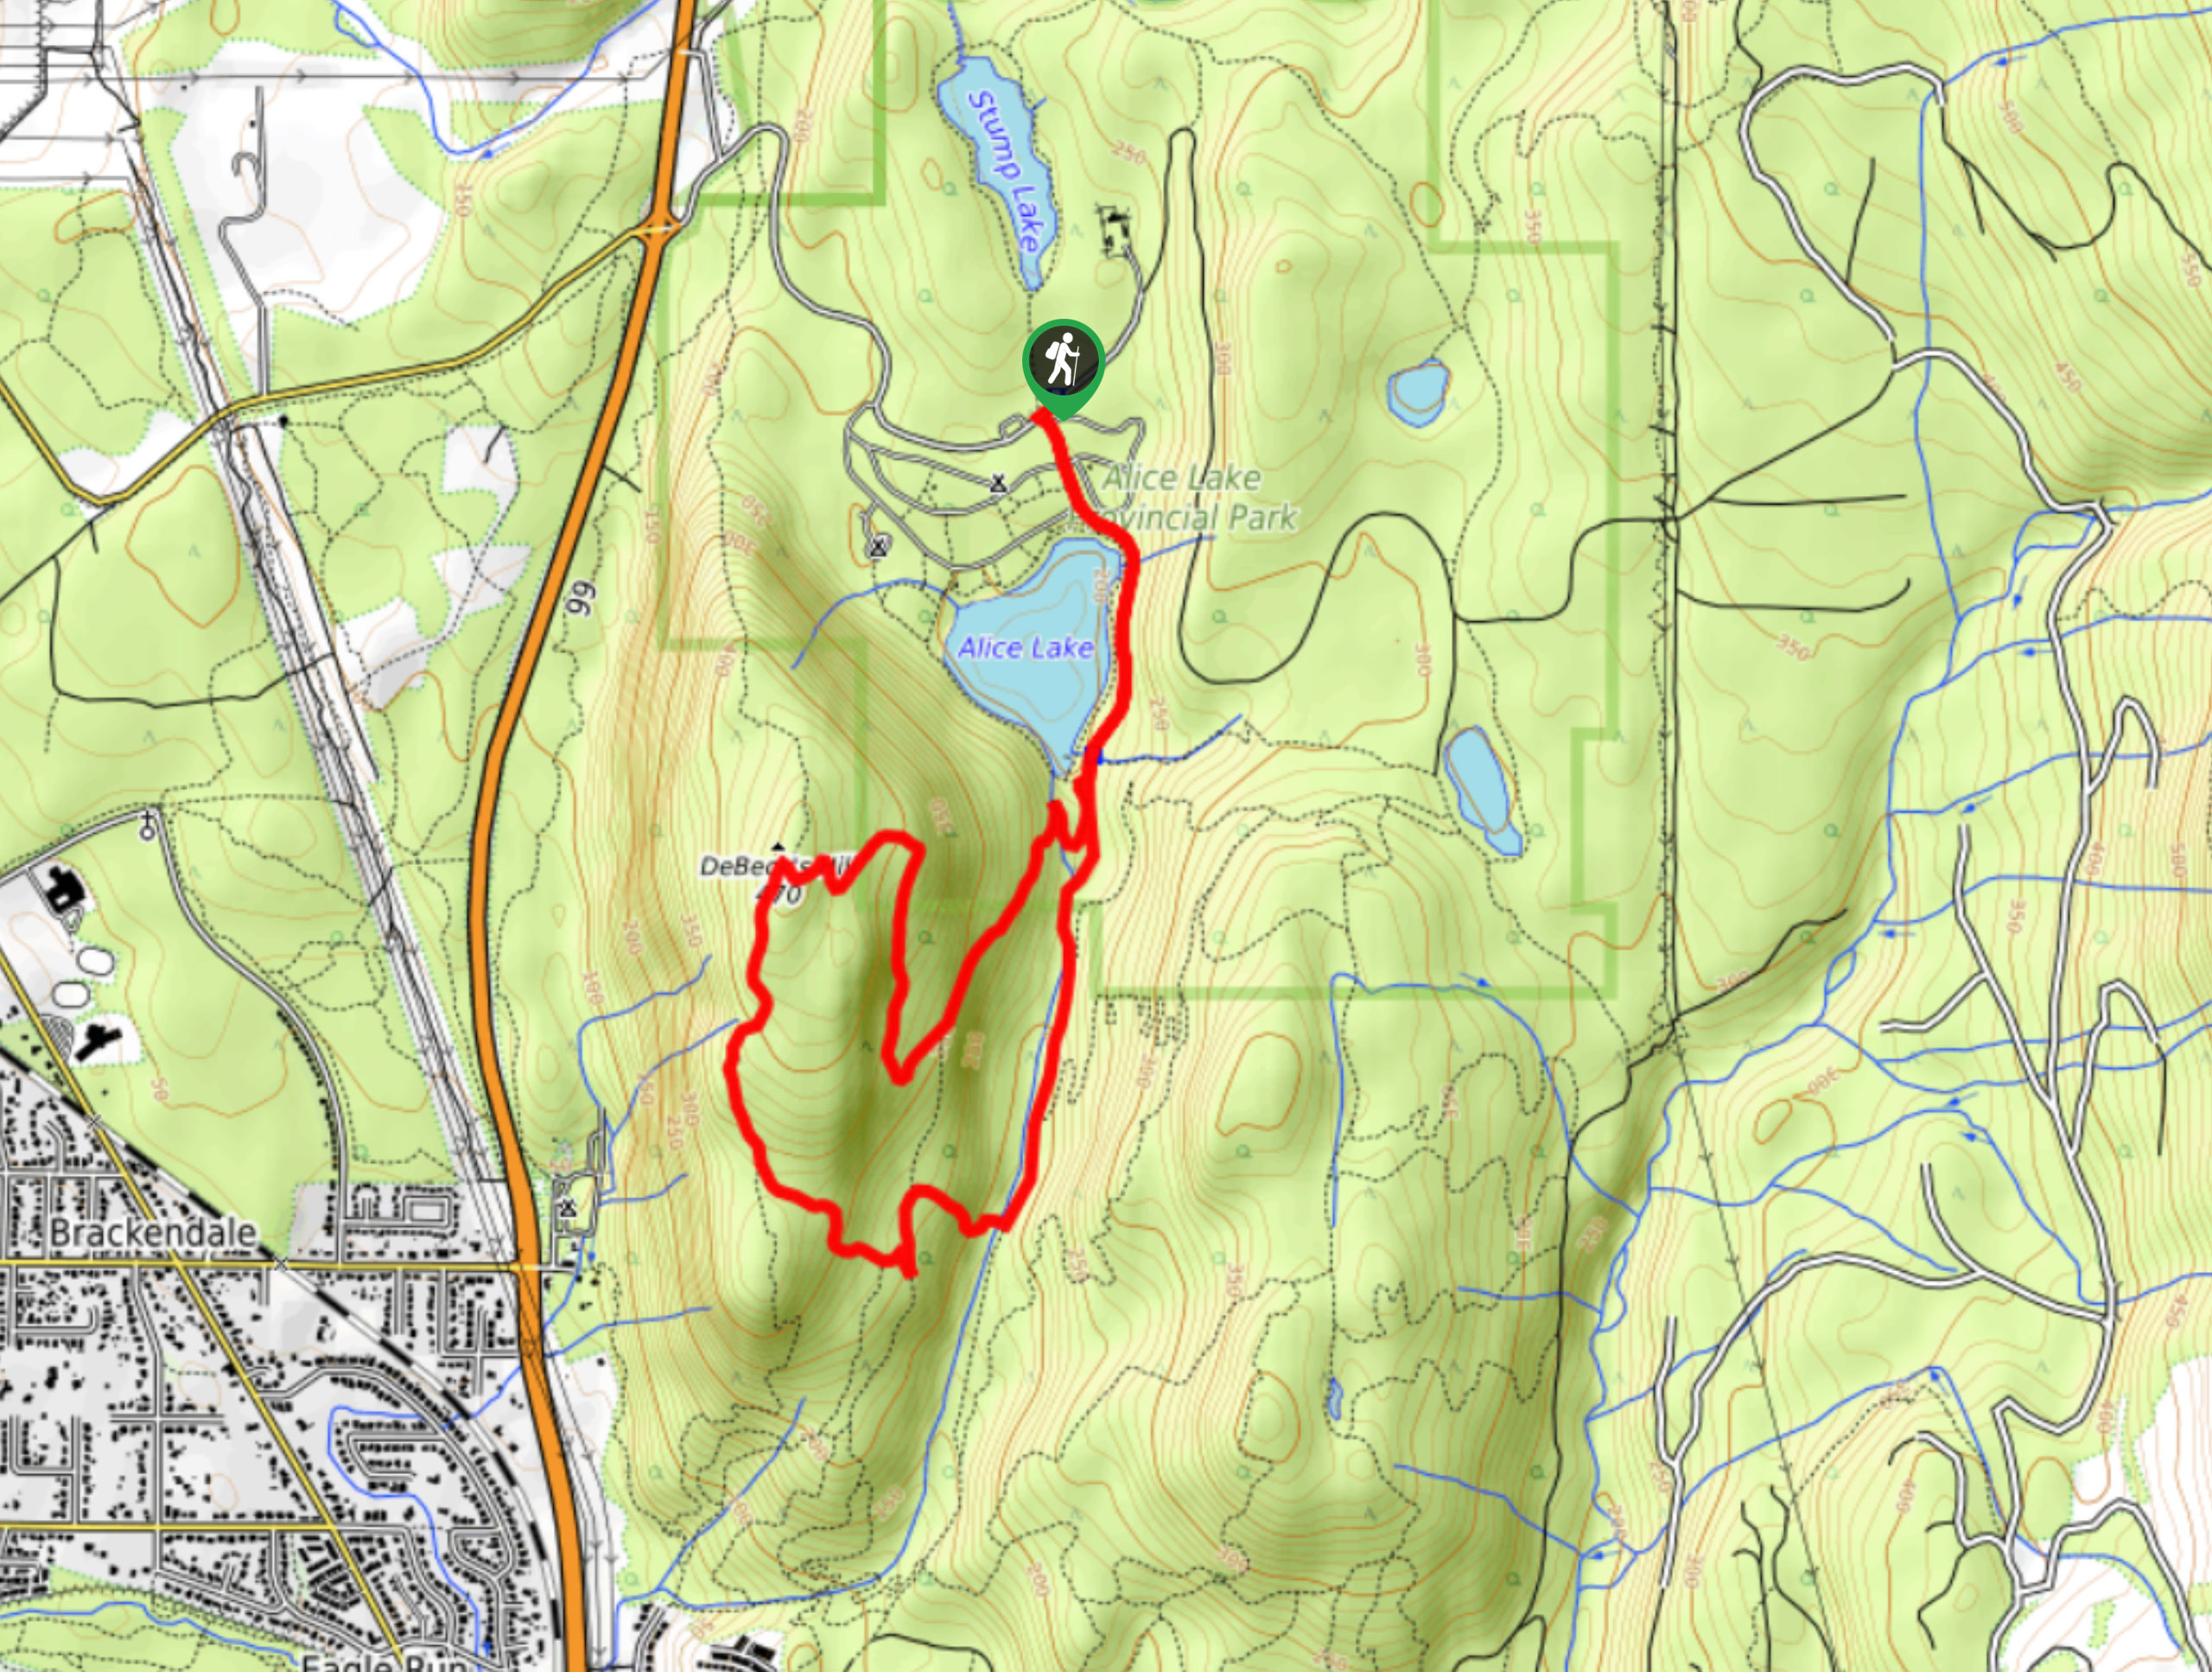 Jack’s Trail to DeBeck’s Hill Map